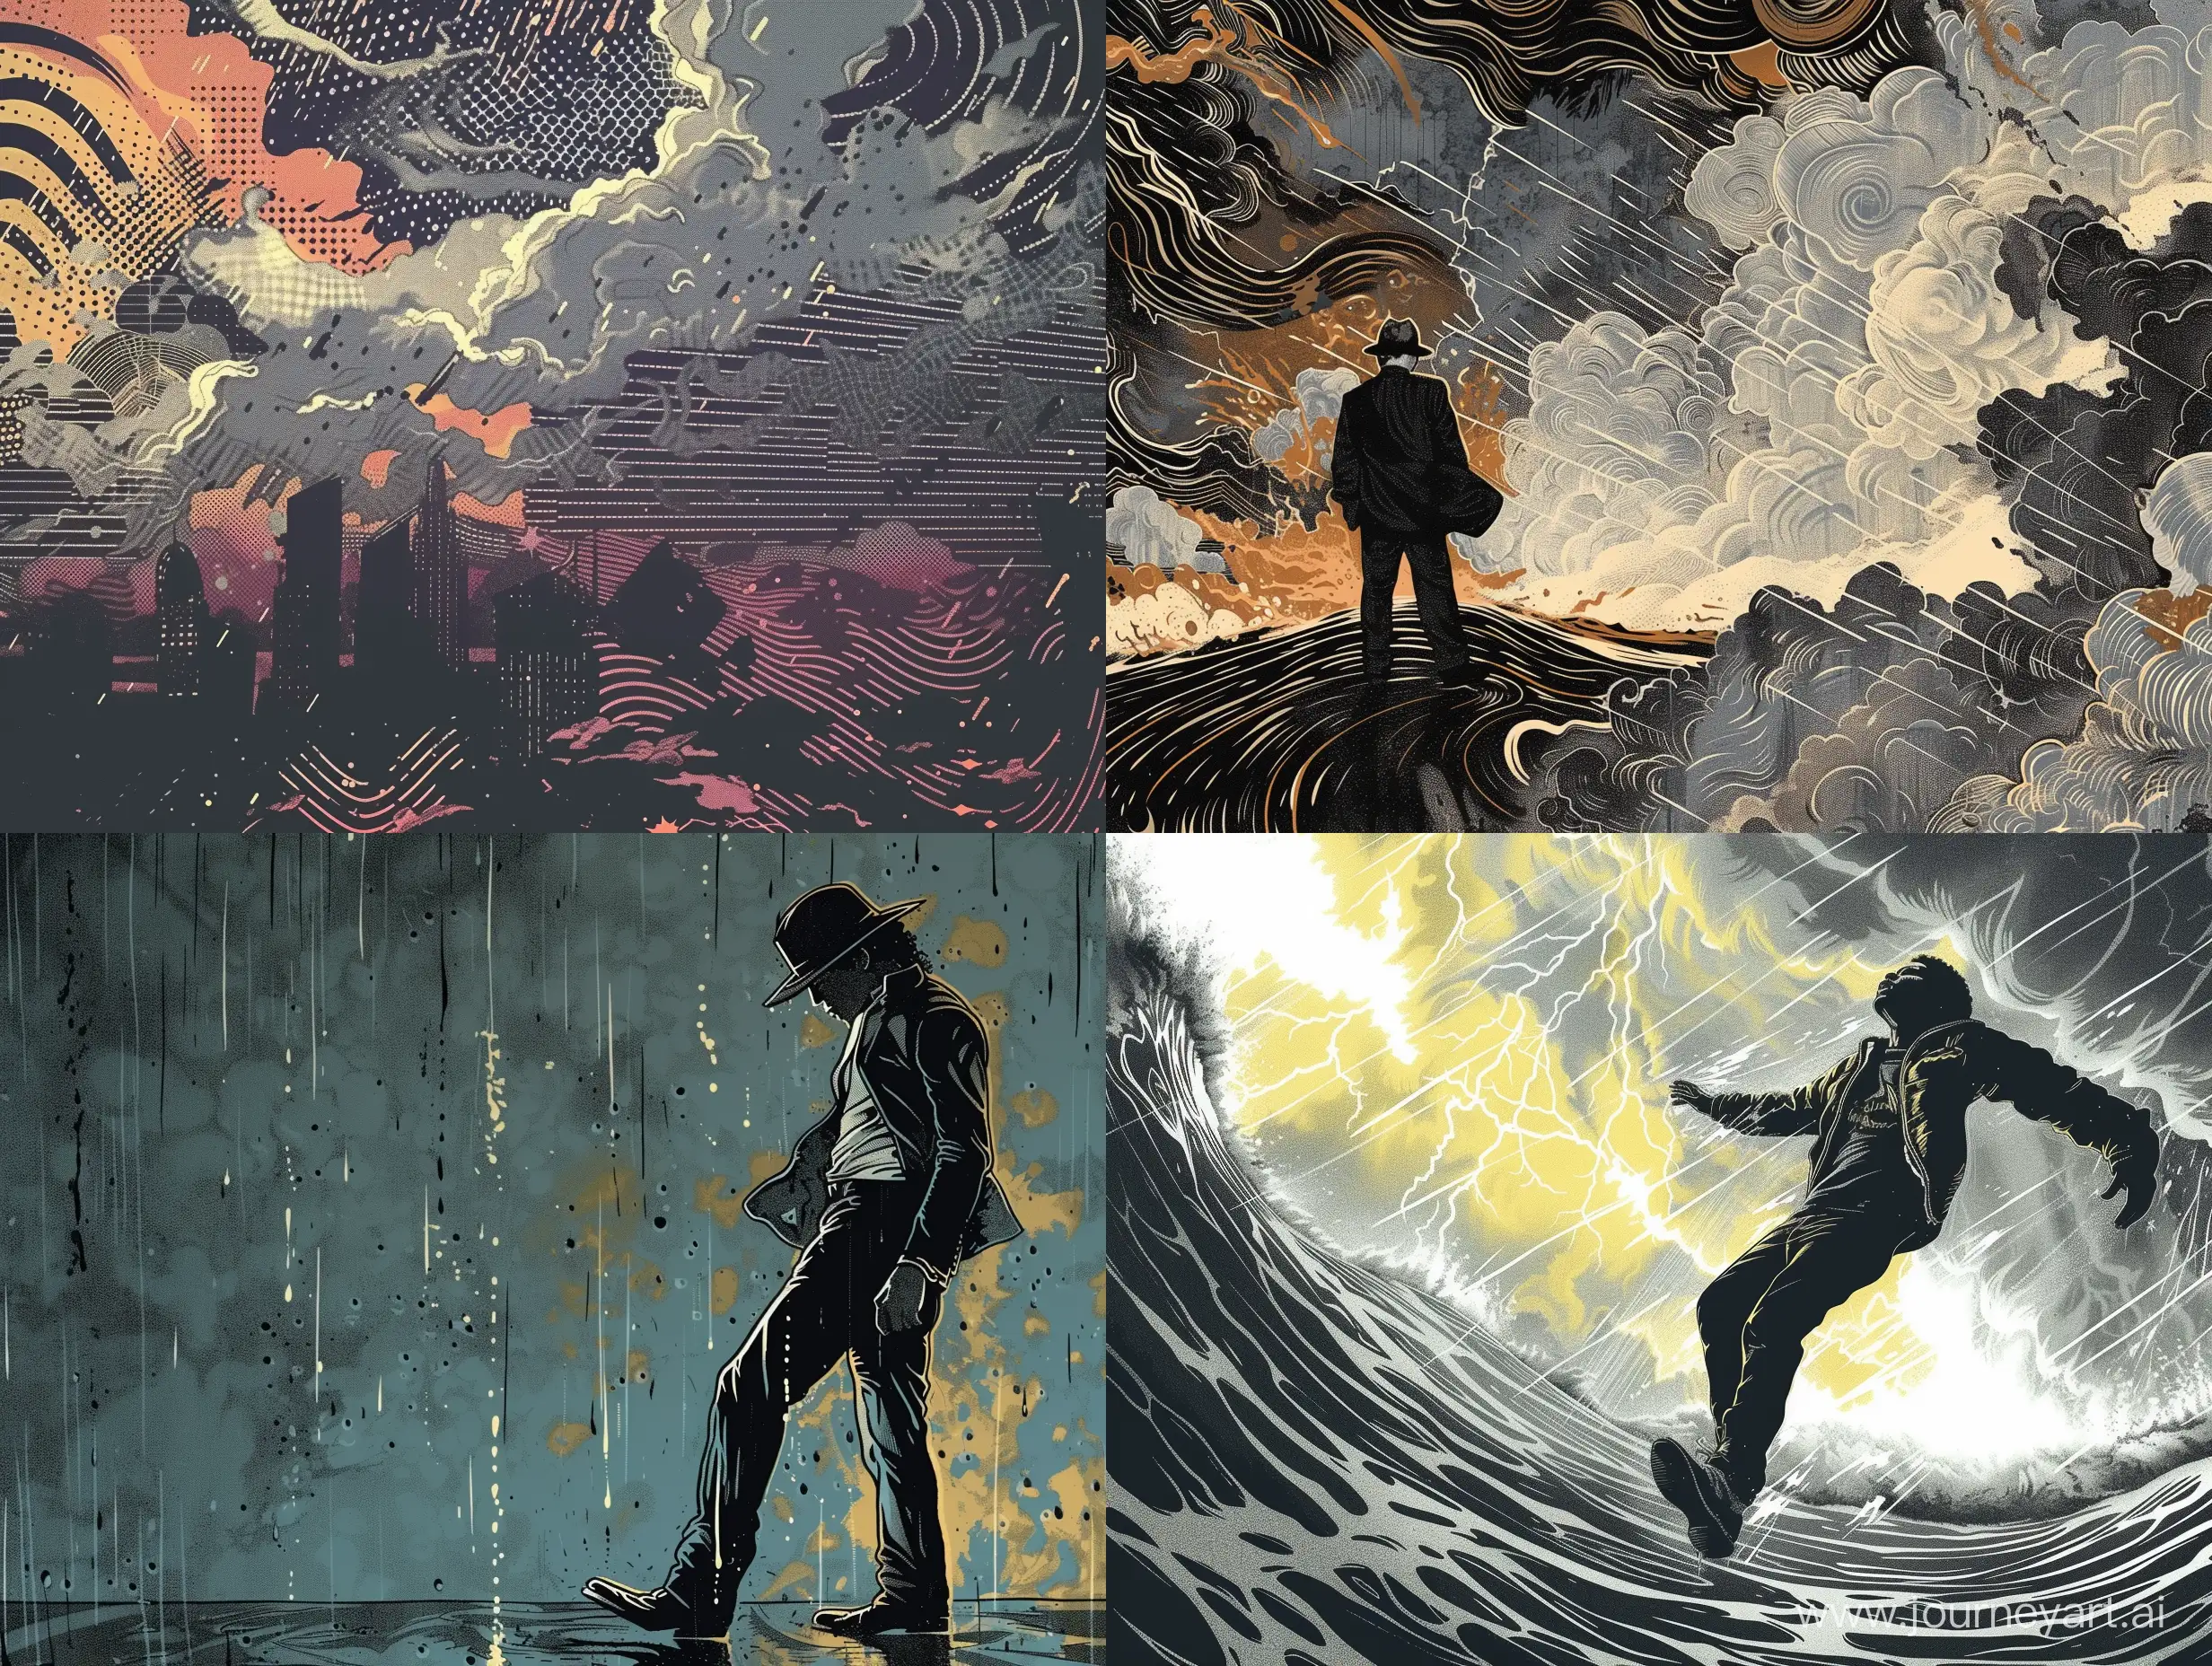 Dynamic-Halftone-Illustrations-of-Severe-Weather-in-Can-You-Feel-It-Inspired-Scene